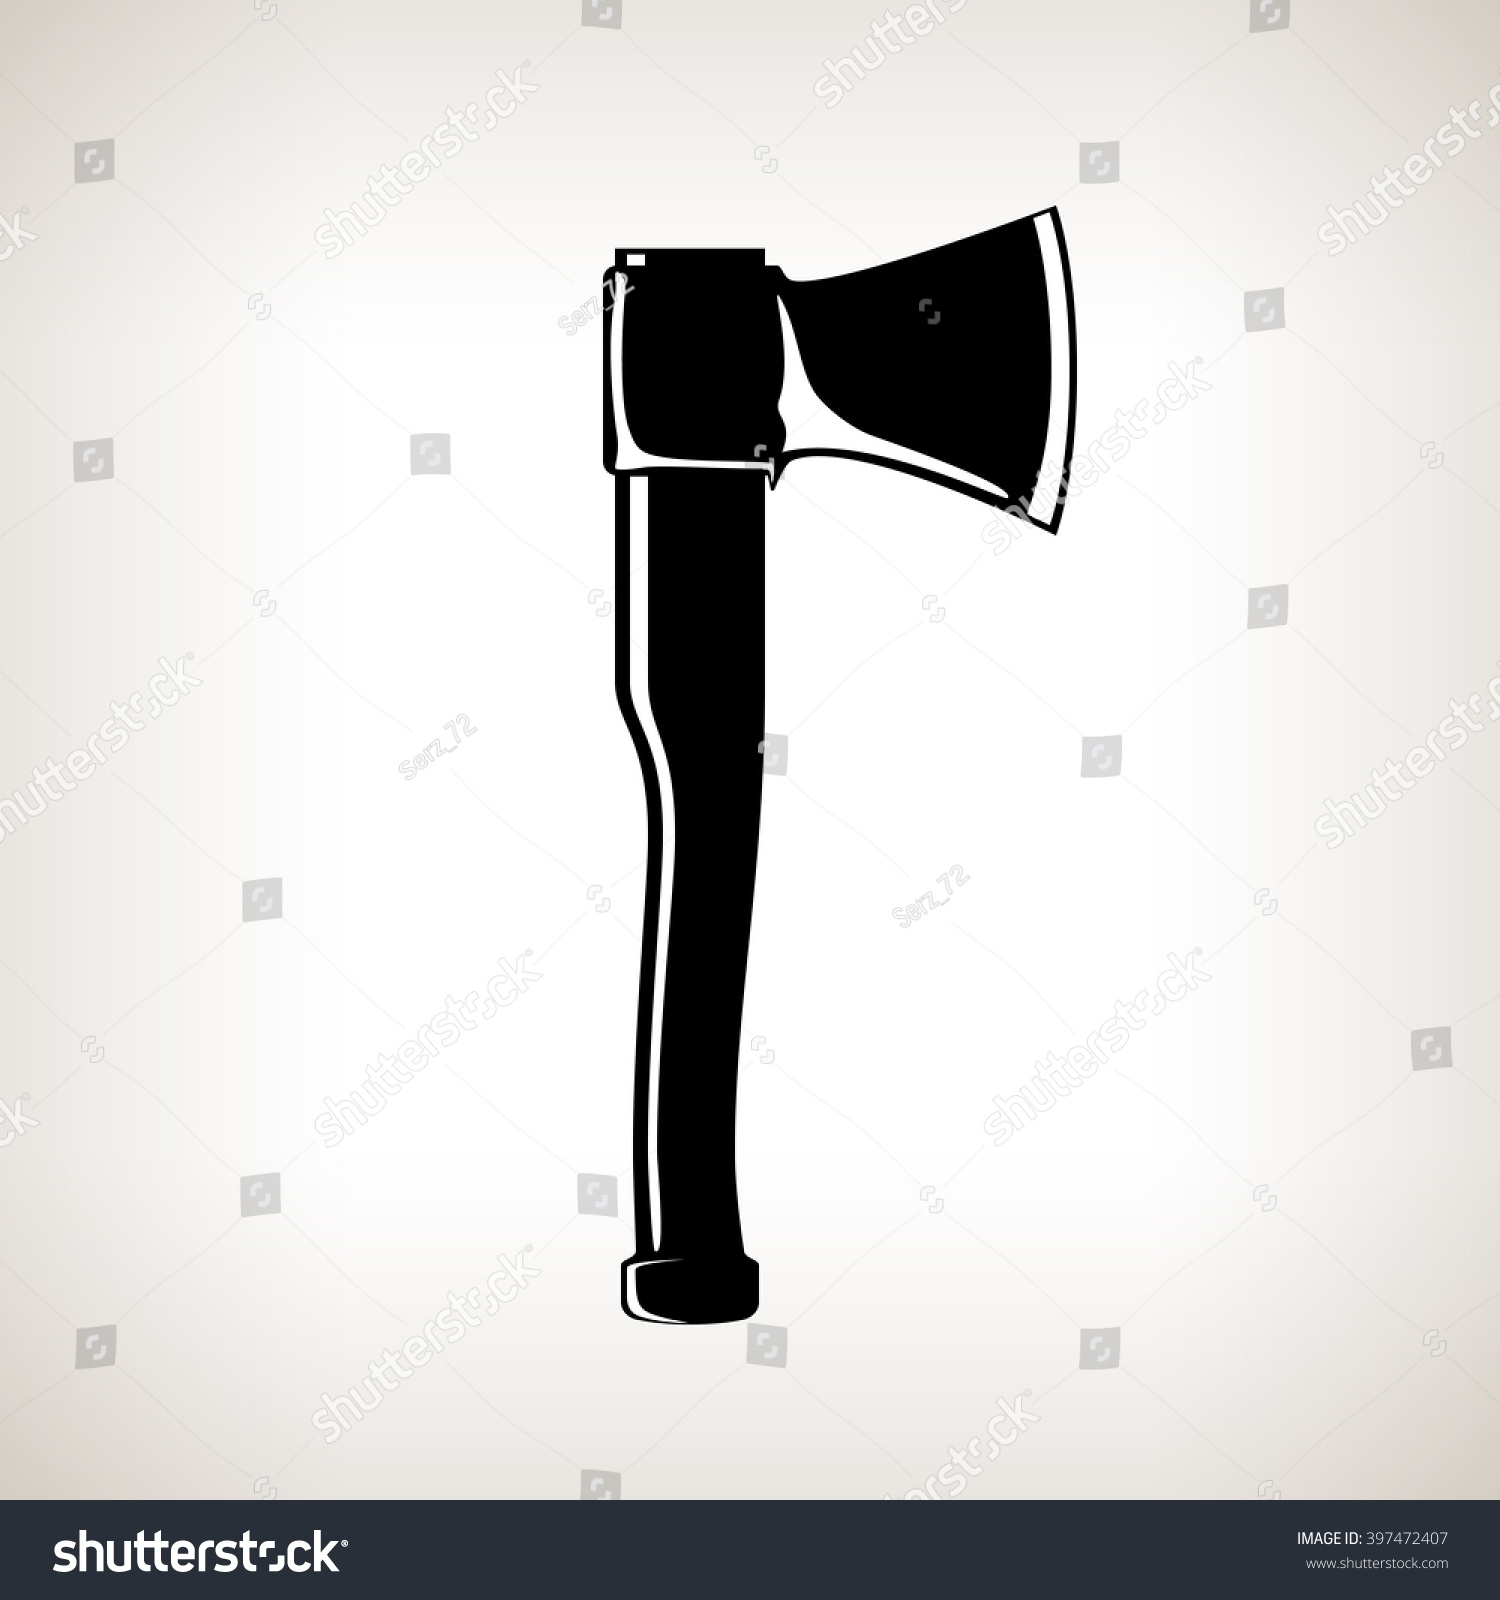 SVG of Axe, Silhouette Modern  Hatchet on a Light  Background, Agricultural Tool Ax ,  Garden Equipment, Black and White Vector Illustration svg